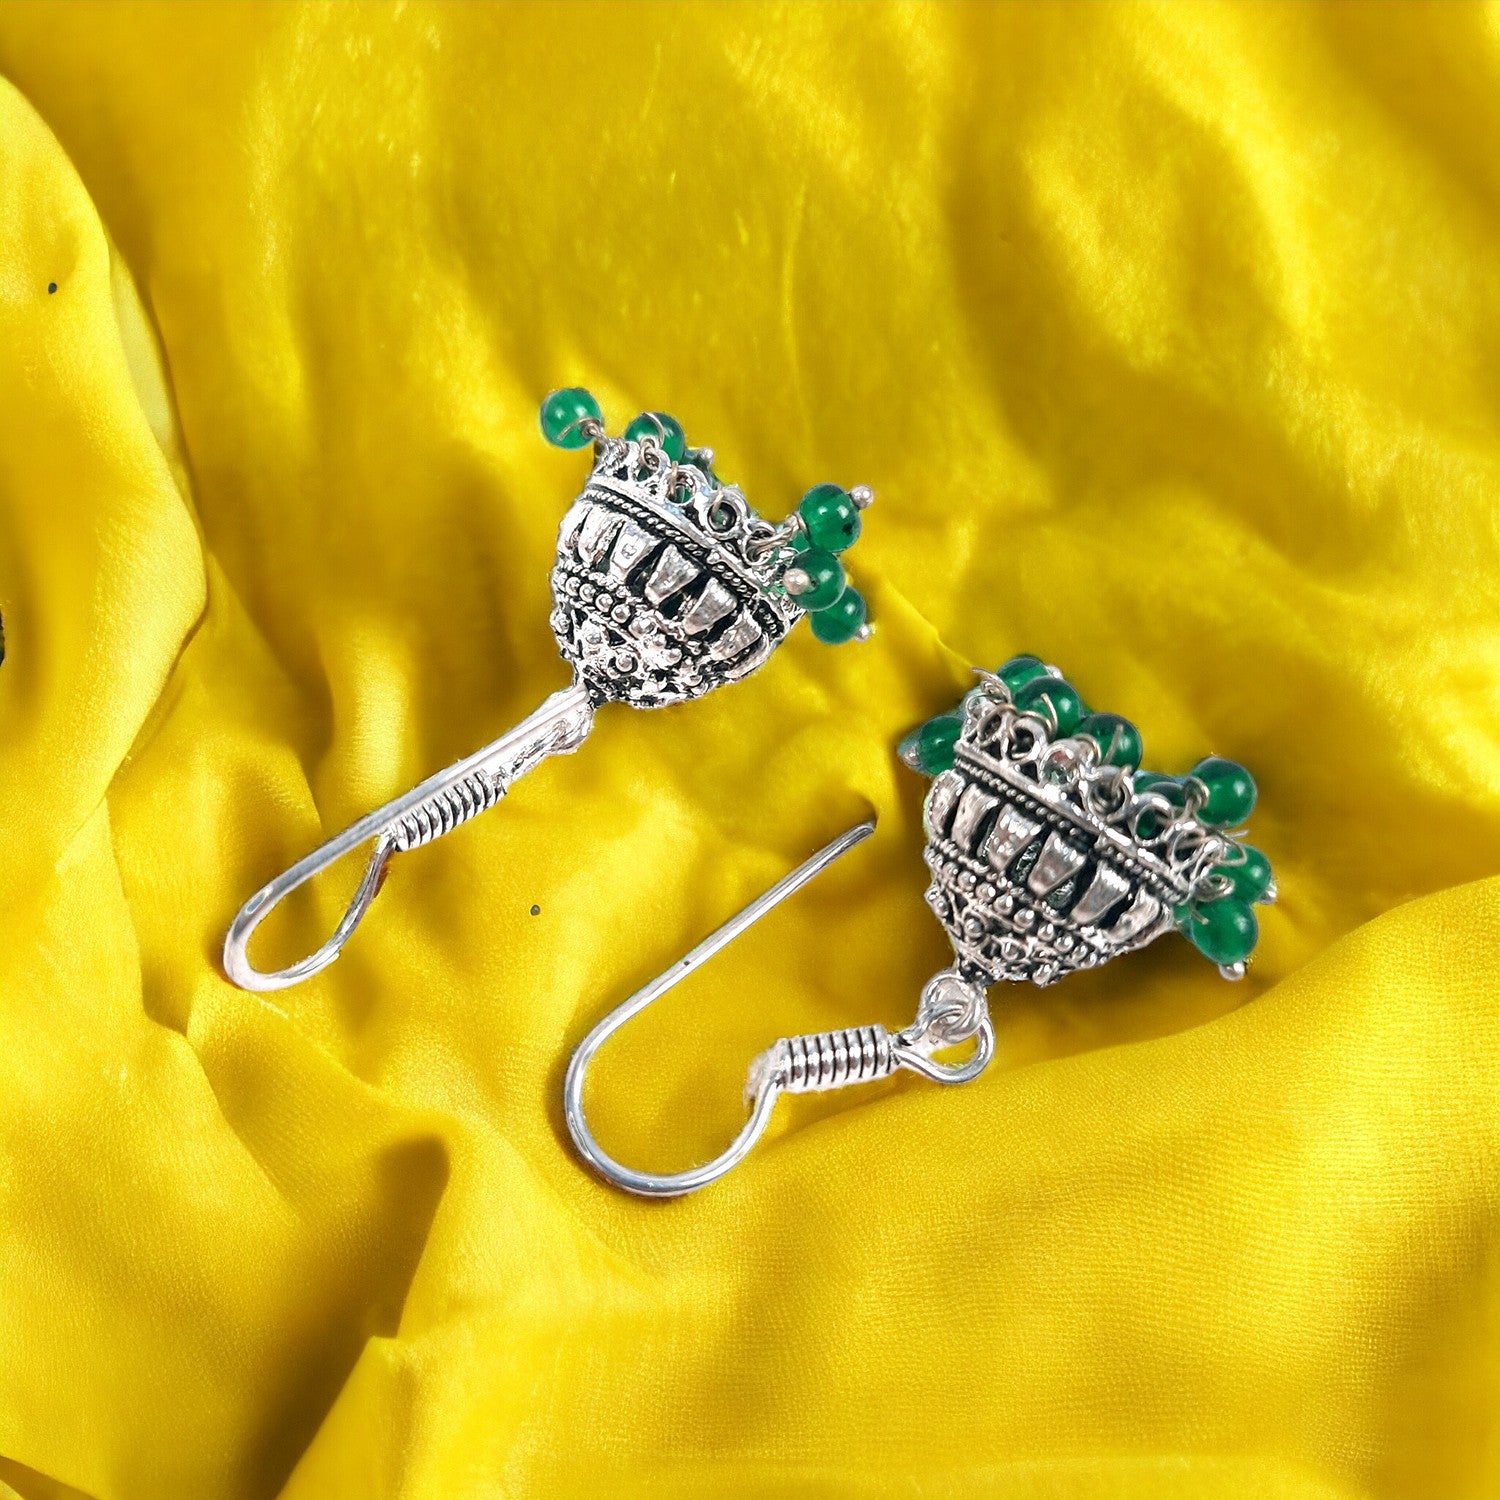 Earrings Jhumka - for Girls and Women | Oxidised Jewelry | Latest Stylish Fashion Jewellery | Gifts for Her, Friendship Day, Valentine's Day Gift - Apkamart